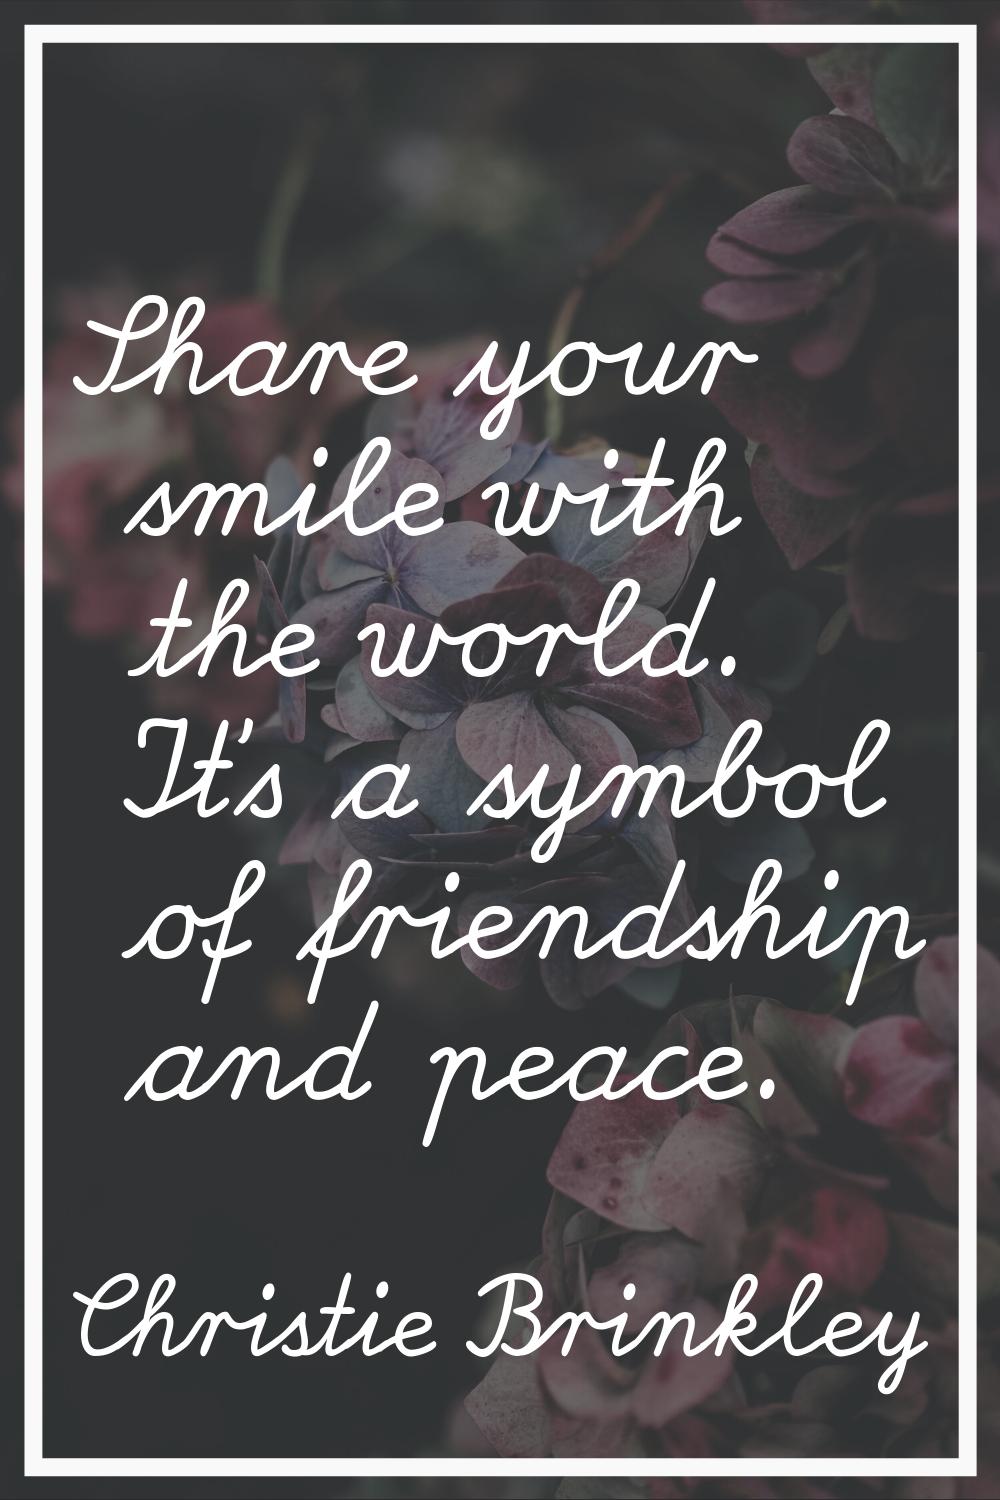 Share your smile with the world. It's a symbol of friendship and peace.